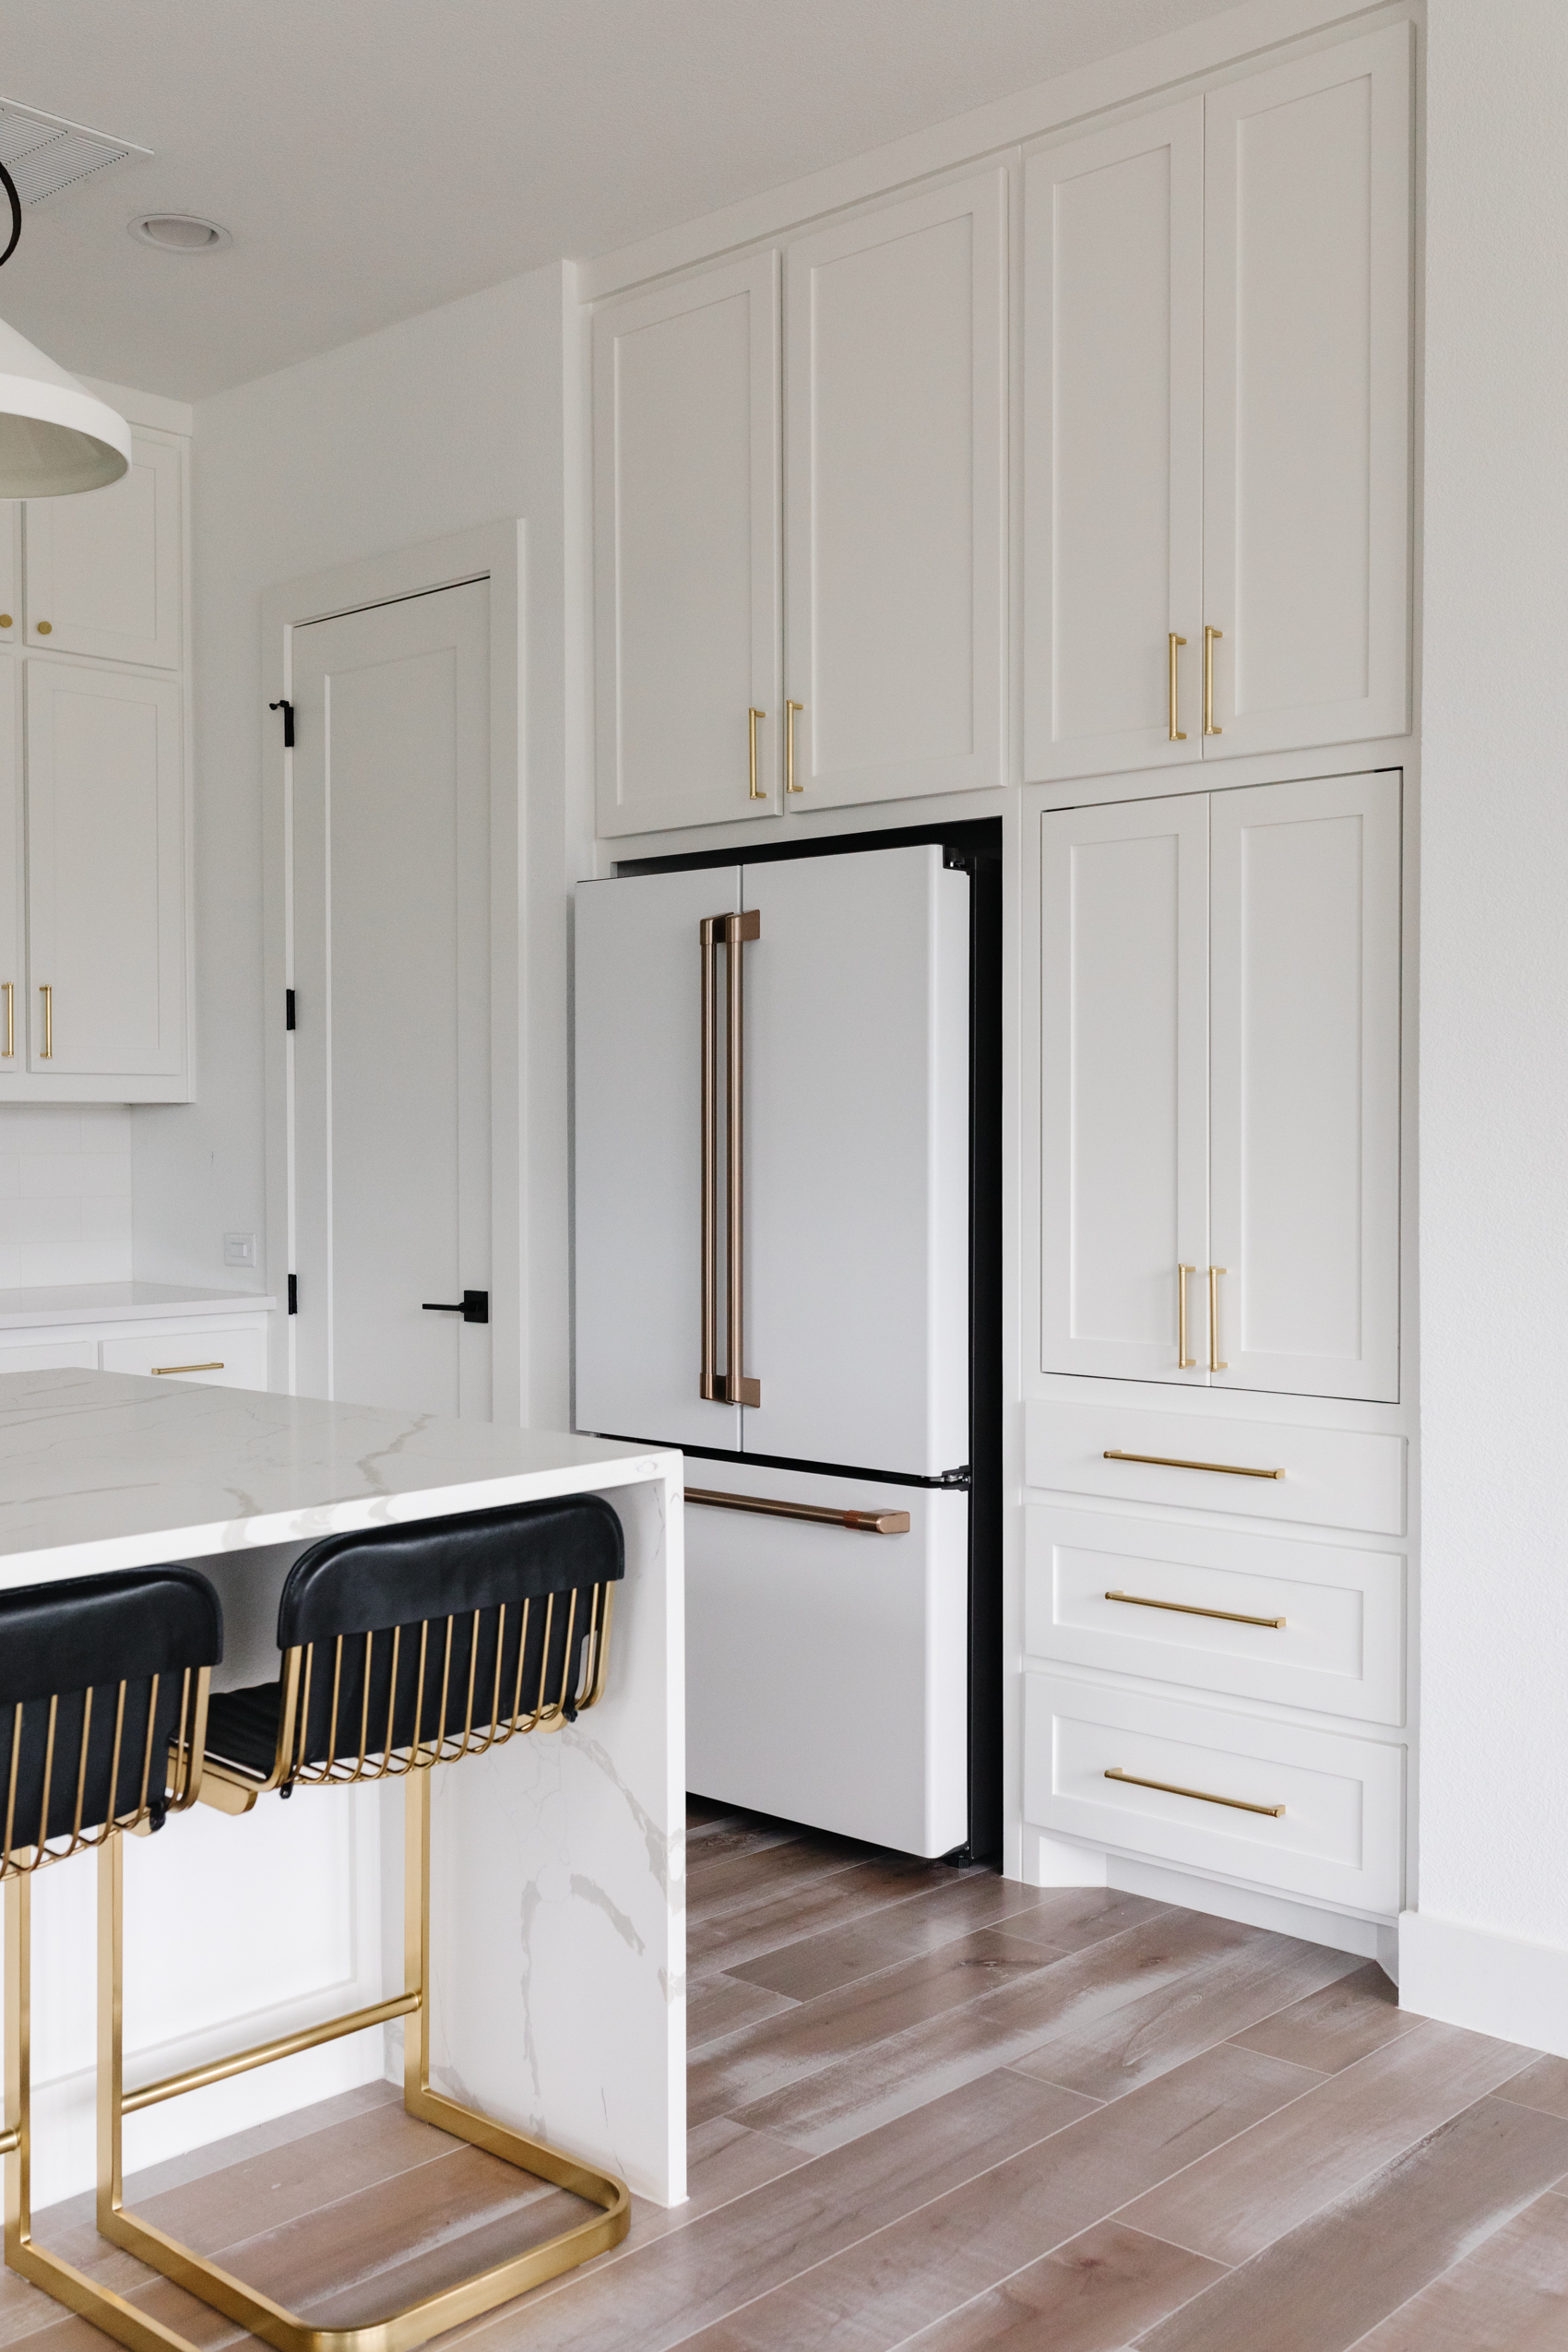 White shaker cabinets in a transitional kitchen with custom appliance garage with sliding doors, Rejuvenation hardware and calacatta foresta quartz waterfall island, Cafe Appliances refrigerator and Shaw Floors Maple Tameron Sanctuary